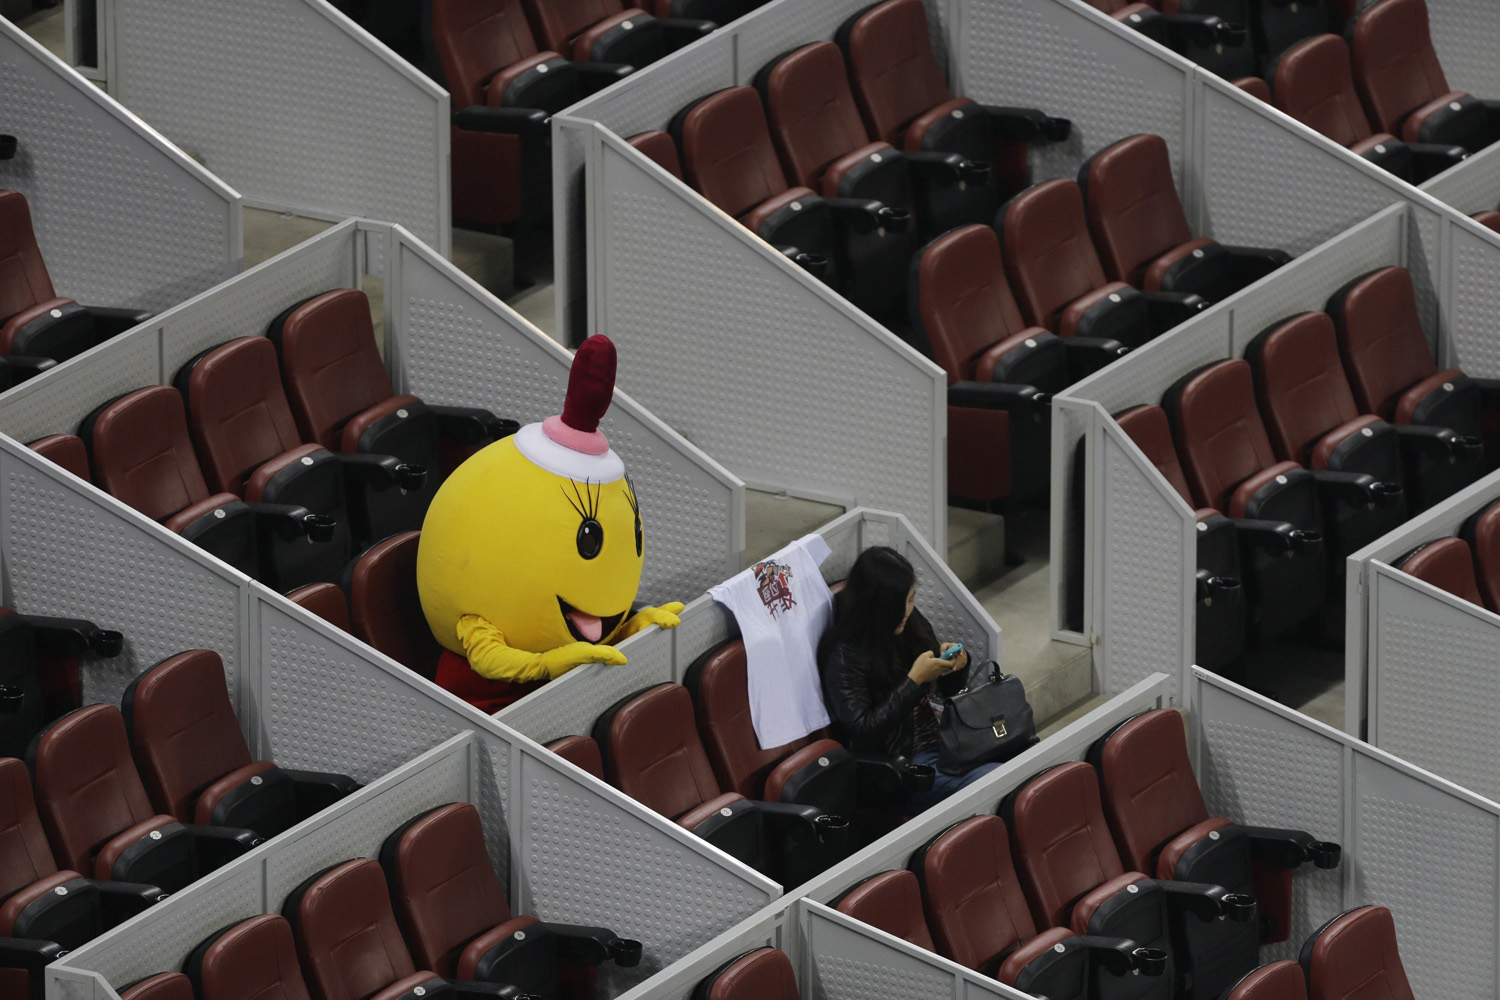 Costumed mascot waits for the men's quarter-final match between Nadal of Spain and Klizan of Slovakia at the China Open tennis tournament in Beijing